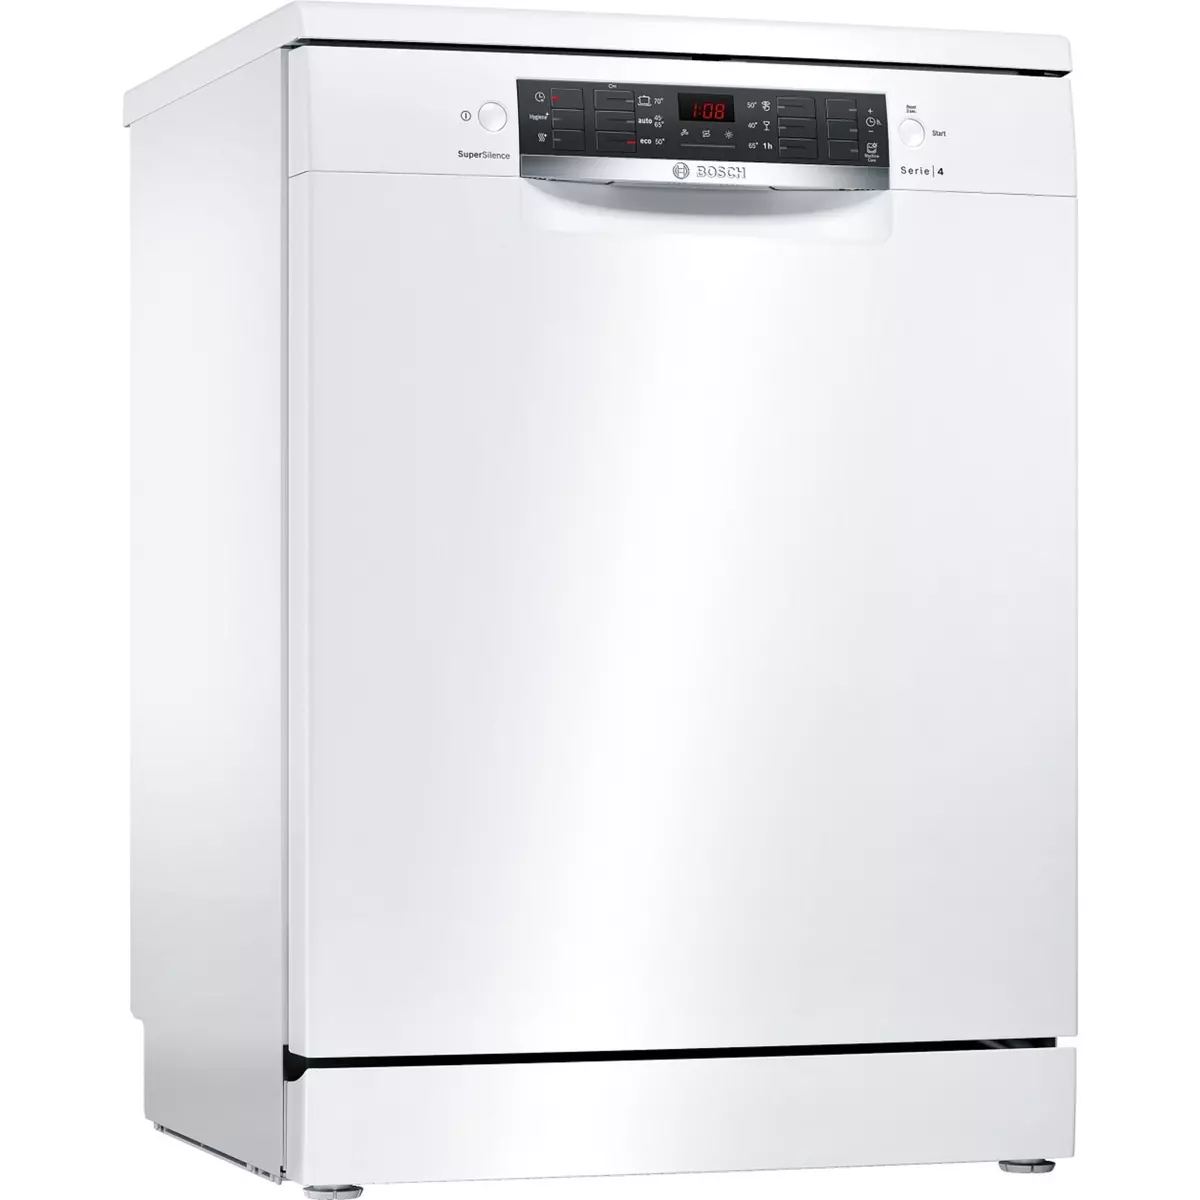 BOSCH Lave-vaisselle SuperSilence pose libre SMS46AW03E, 12 couverts, 60 cm, 44 dB, 6 programmes dont Silence 42 dB